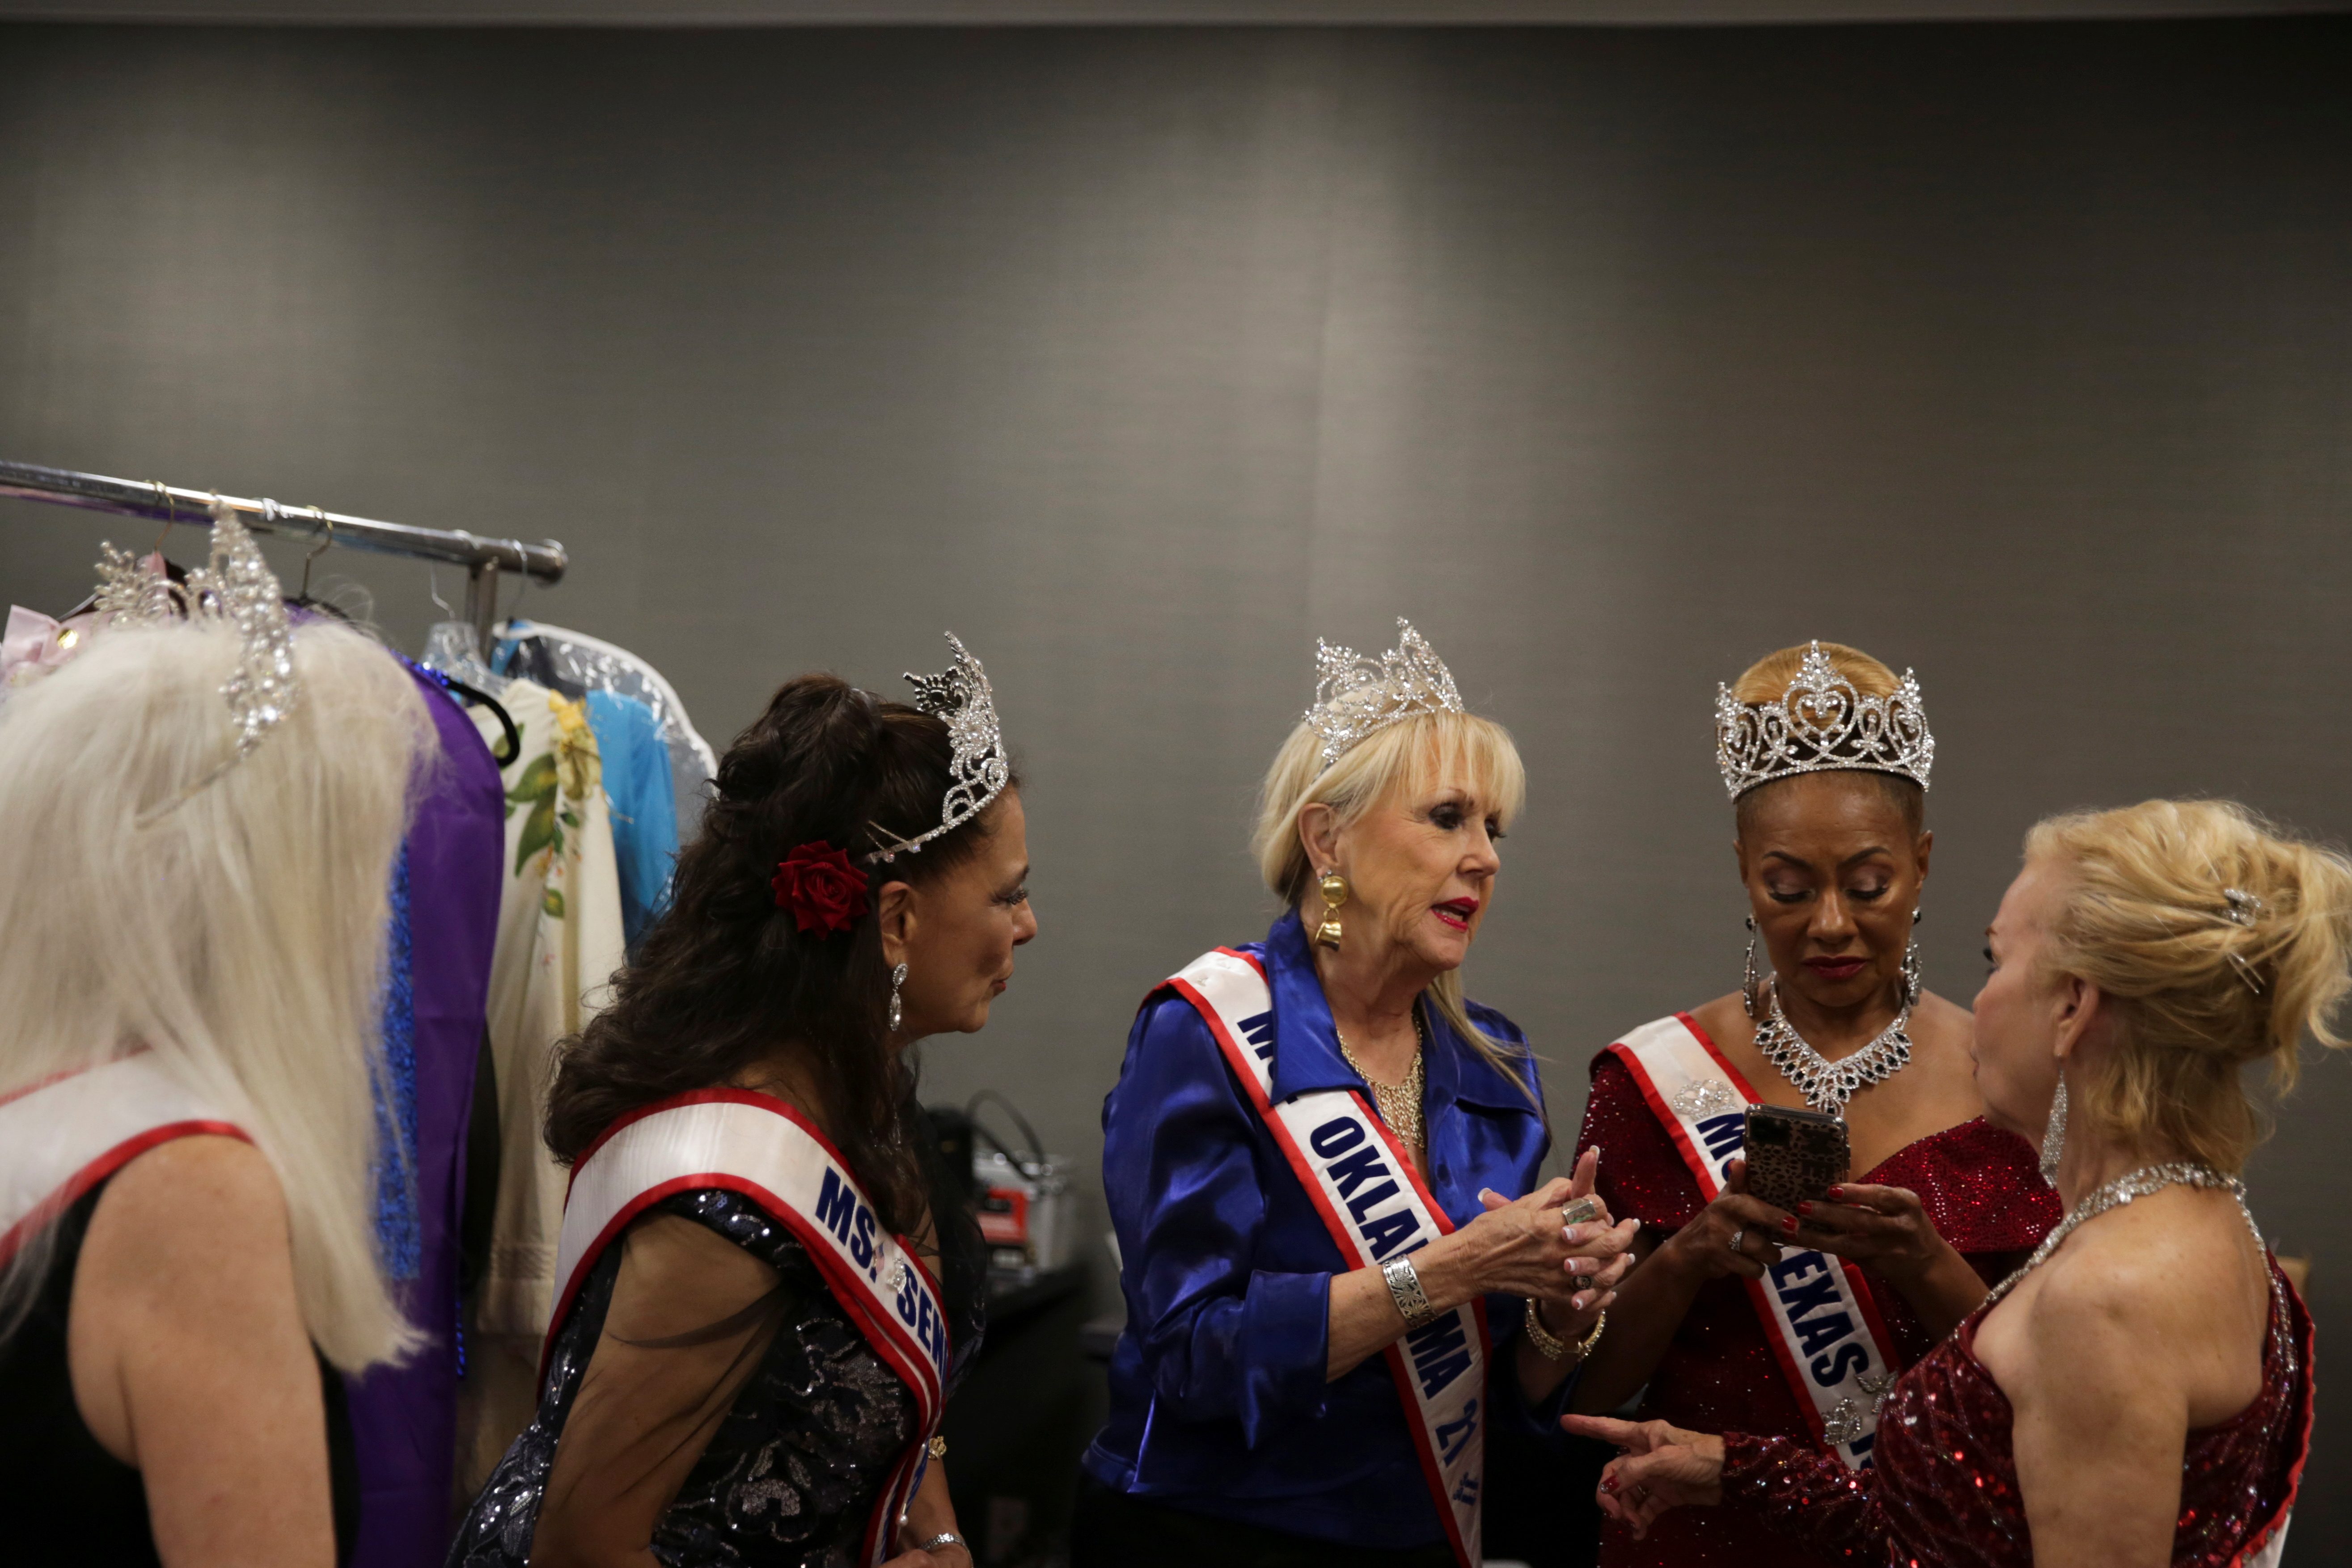 ‘Love being 60’: Texas pageant contestants show age is just a number